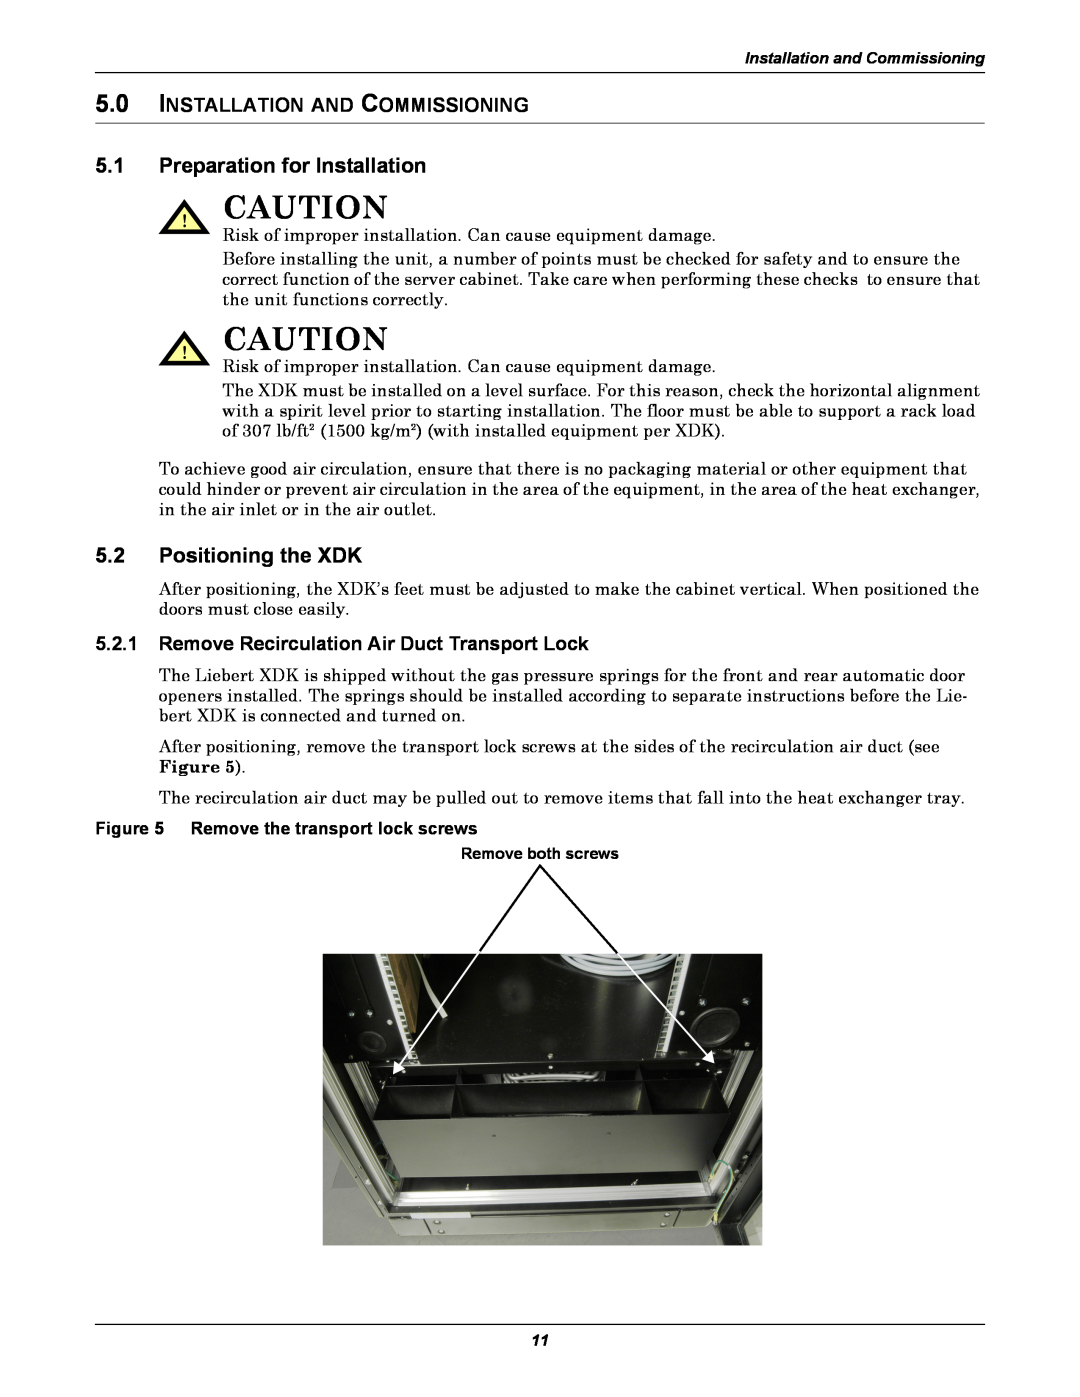 Liebert user manual Preparation for Installation, Positioning the XDK, Installation And Commissioning 